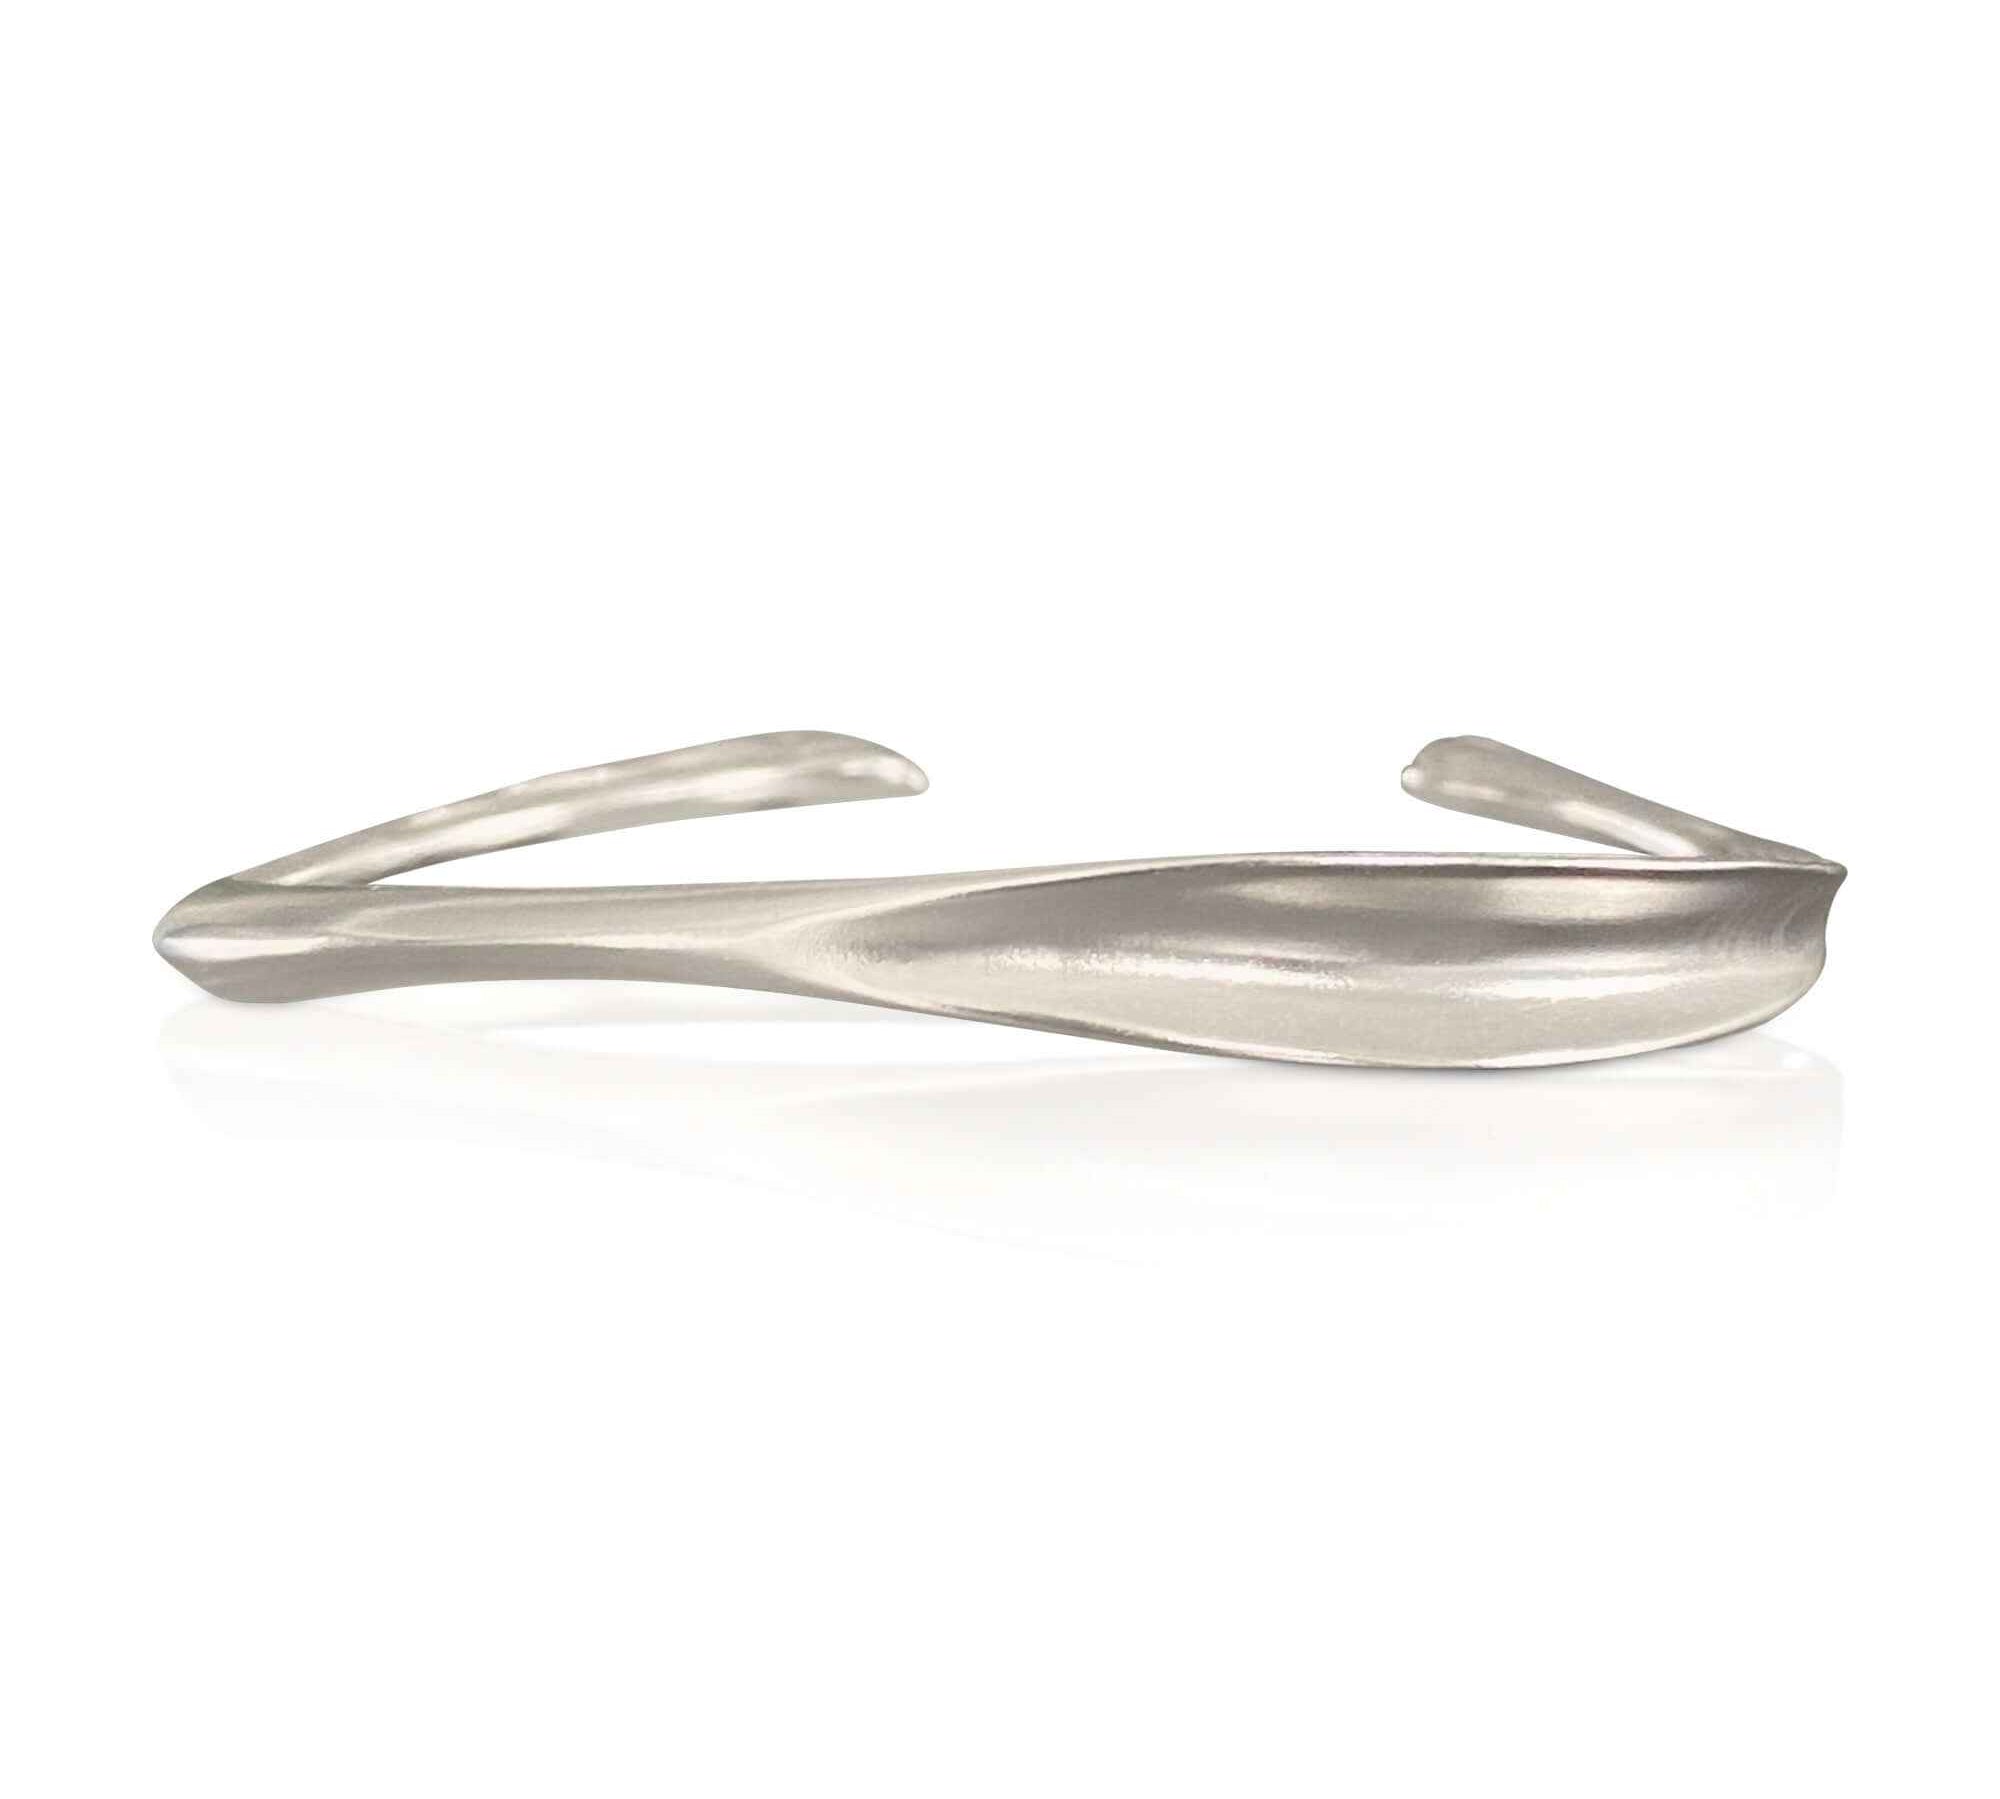 Refined Women's Silver Wave Bangle by Alessandra James - Timeless Sterling Silver Jewelry Piece.